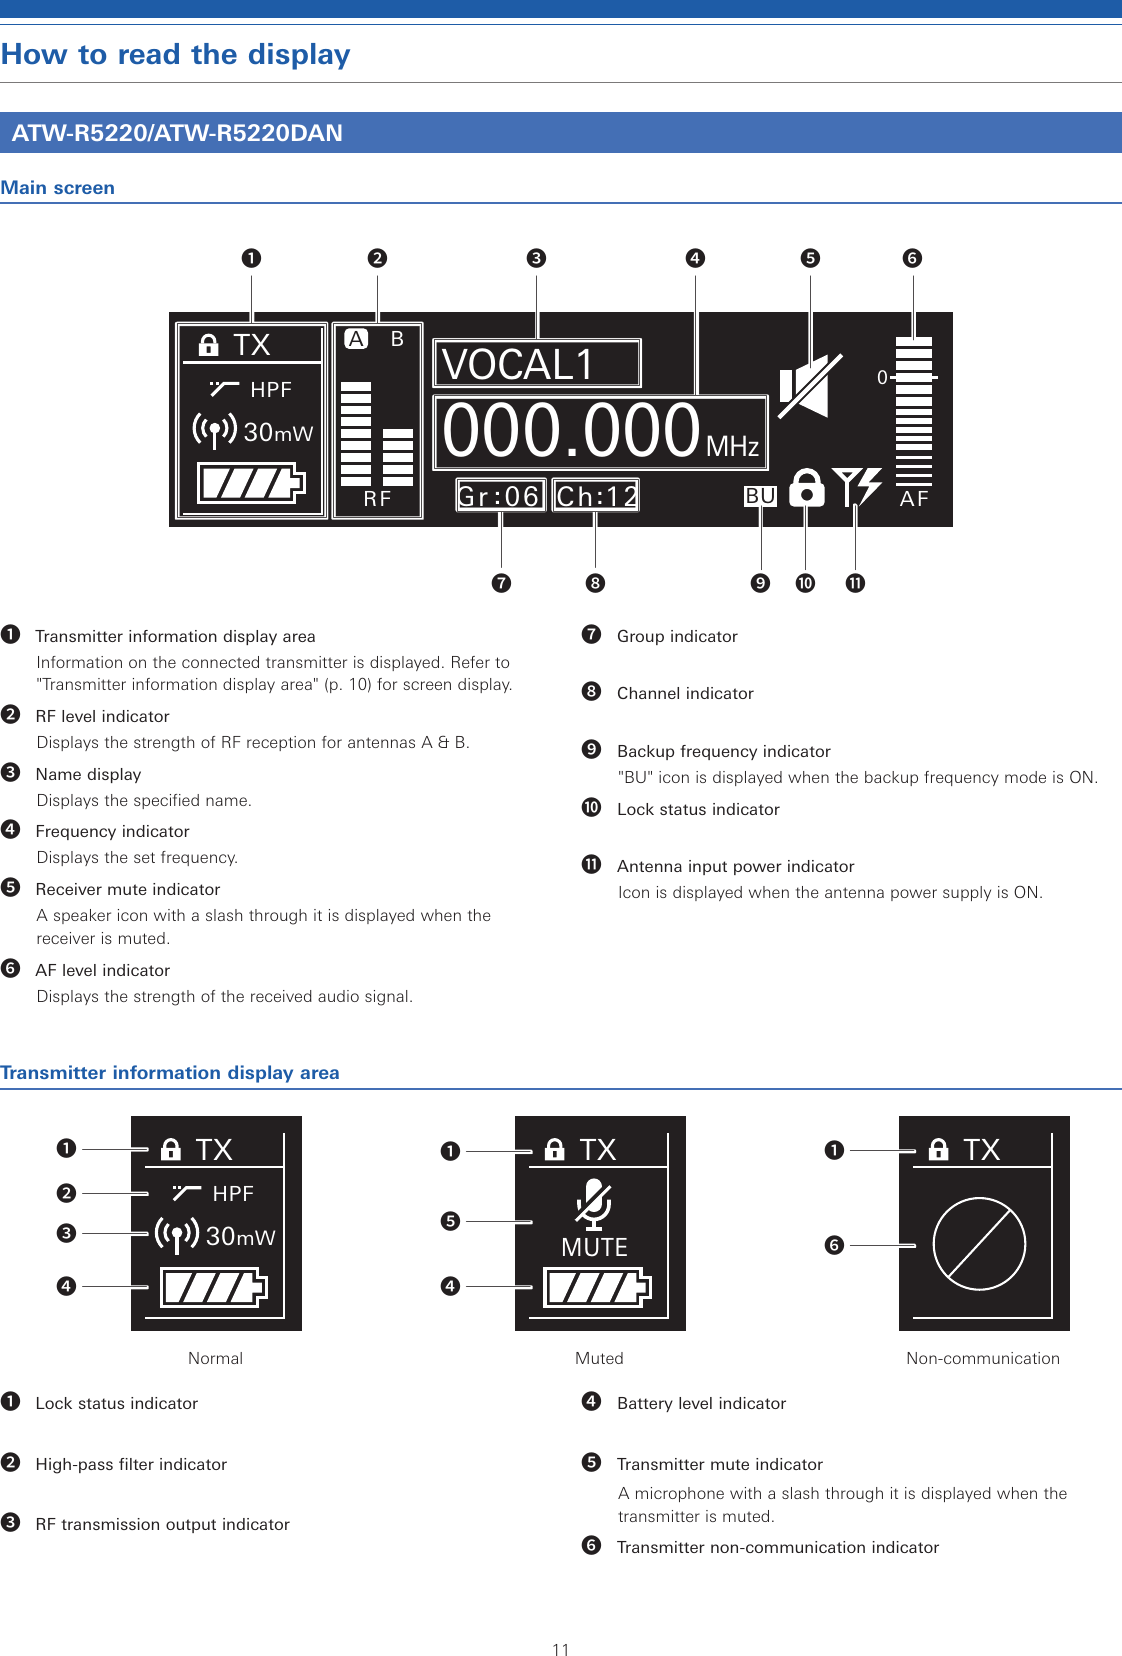 11How to read the displayATW-R5220/ATW-R5220DANMain screen❶ Transmitter information display areaInformation on the connected transmitter is displayed. Refer to &quot;Transmitter information display area&quot; (p. 10) for screen display.❷ RF level indicatorDisplays the strength of RF reception for antennas A &amp; B.❸ Name displayDisplays the specified name. ❹ Frequency indicatorDisplays the set frequency.❺ Receiver mute indicatorA speaker icon with a slash through it is displayed when the receiver is muted.❻ AF level indicatorDisplays the strength of the received audio signal.❼ Group indicator❽ Channel indicator❾ Backup frequency indicator&quot;BU&quot; icon is displayed when the backup frequency mode is ON.❿ Lock status indicator⓫ Antenna input power indicatorIcon is displayed when the antenna power supply is ON.Transmitter information display areaTXHPF30mW❶❷❸❹TXMUTE❶❺❹TX❶❻Normal Muted Non-communication❶Lock status indicator❷High-pass filter indicator❸RF transmission output indicator❹Battery level indicator❺Transmitter mute indicatorA microphone with a slash through it is displayed when the transmitter is muted.❻Transmitter non-communication indicatorTXHPFBRF AFBU0000.000VOCAL1MHzA30mWGr 06 Ch 12❷ ❸ ❹ ❺ ❻❼ ❽ ❿❾ ⓫❶